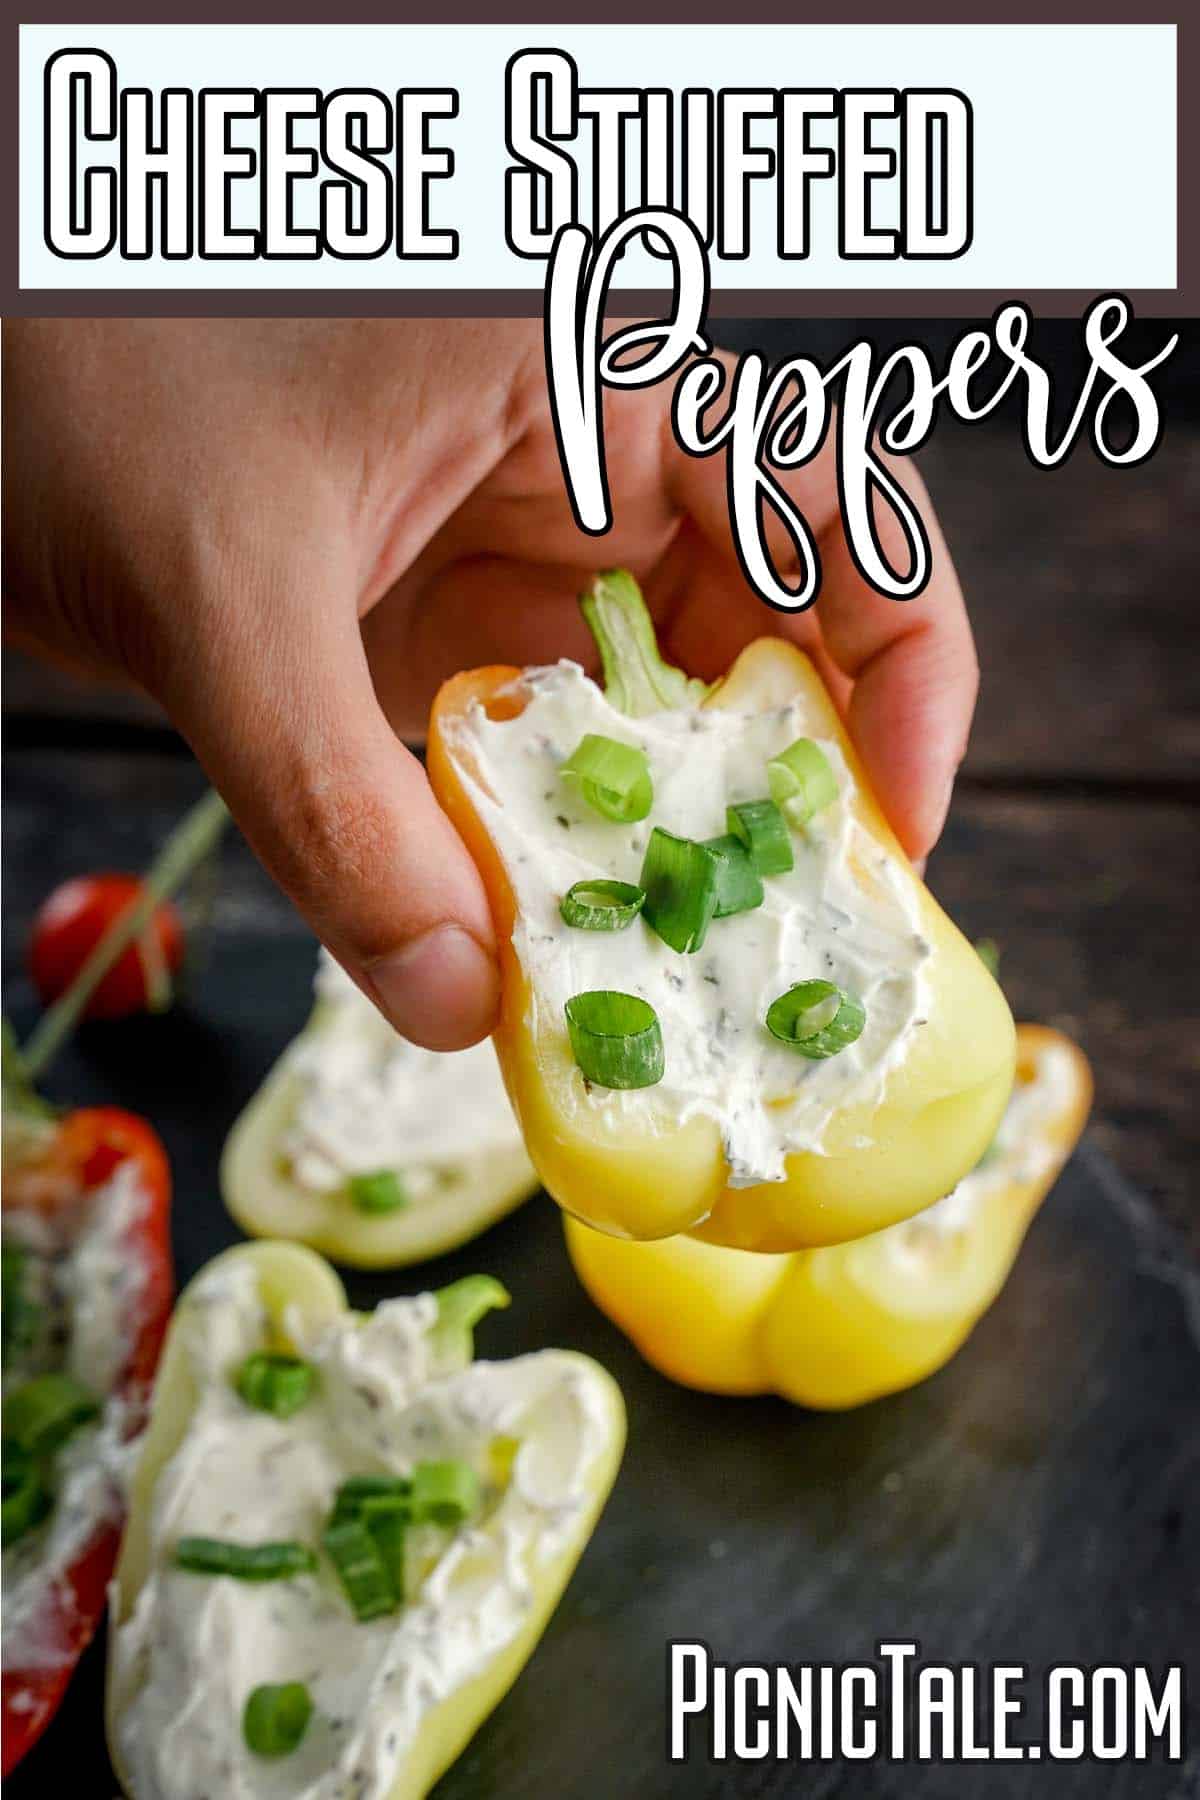 cheese stuffed baby peppers with text which reads cheese stuffed peppers